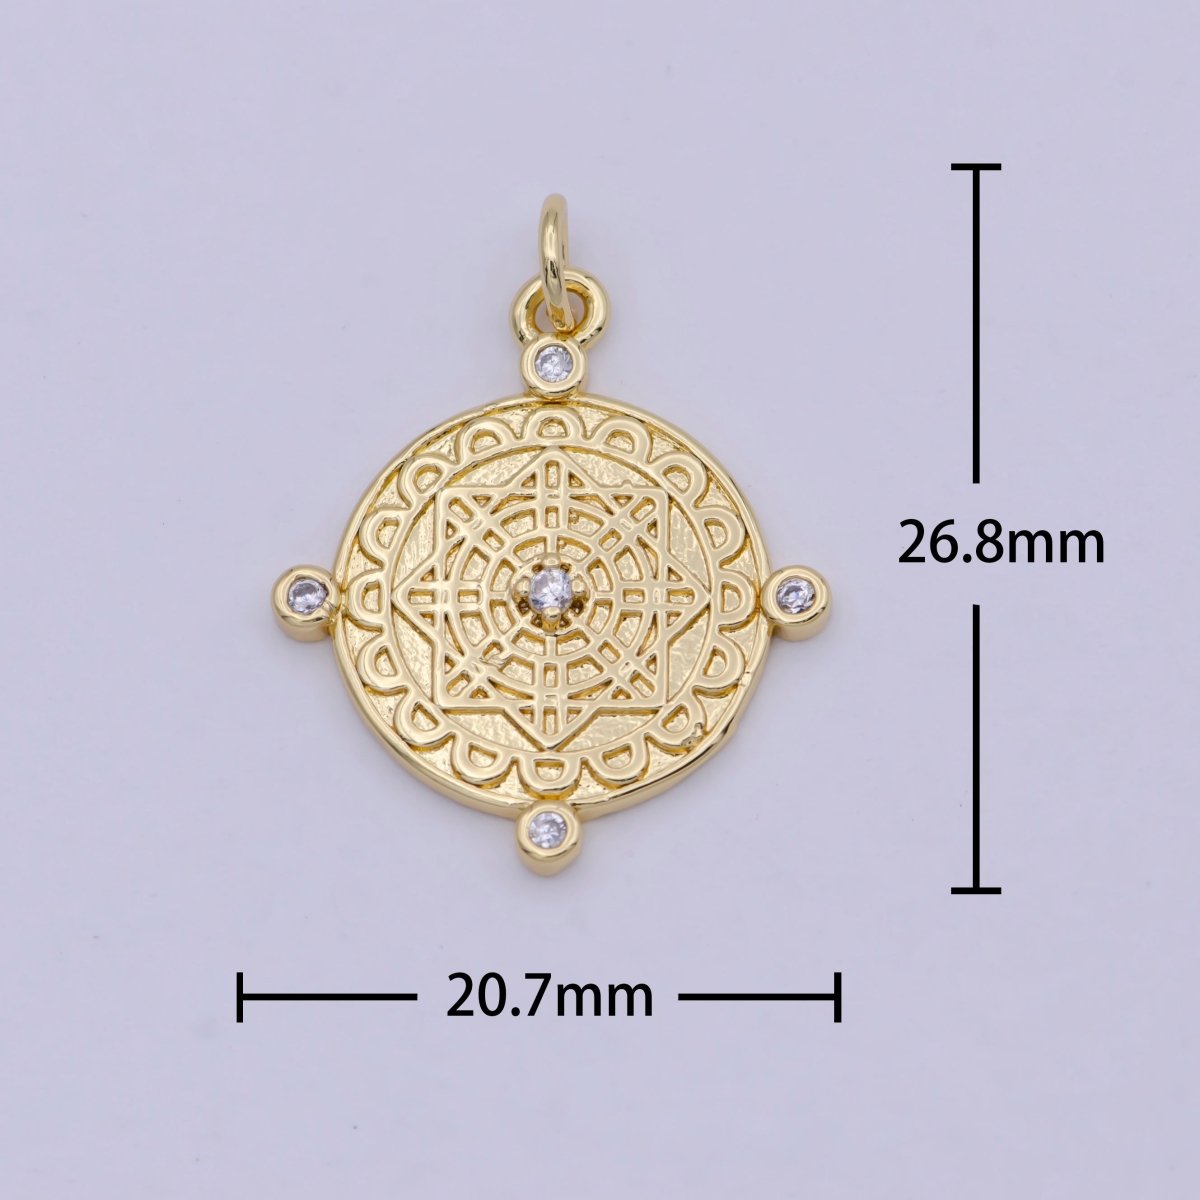 Compass Pendant, cubic zirconia cz diamonds, 14K Gold Filled, medallion pendant for Necklace Jewelry Making W-170 - DLUXCA